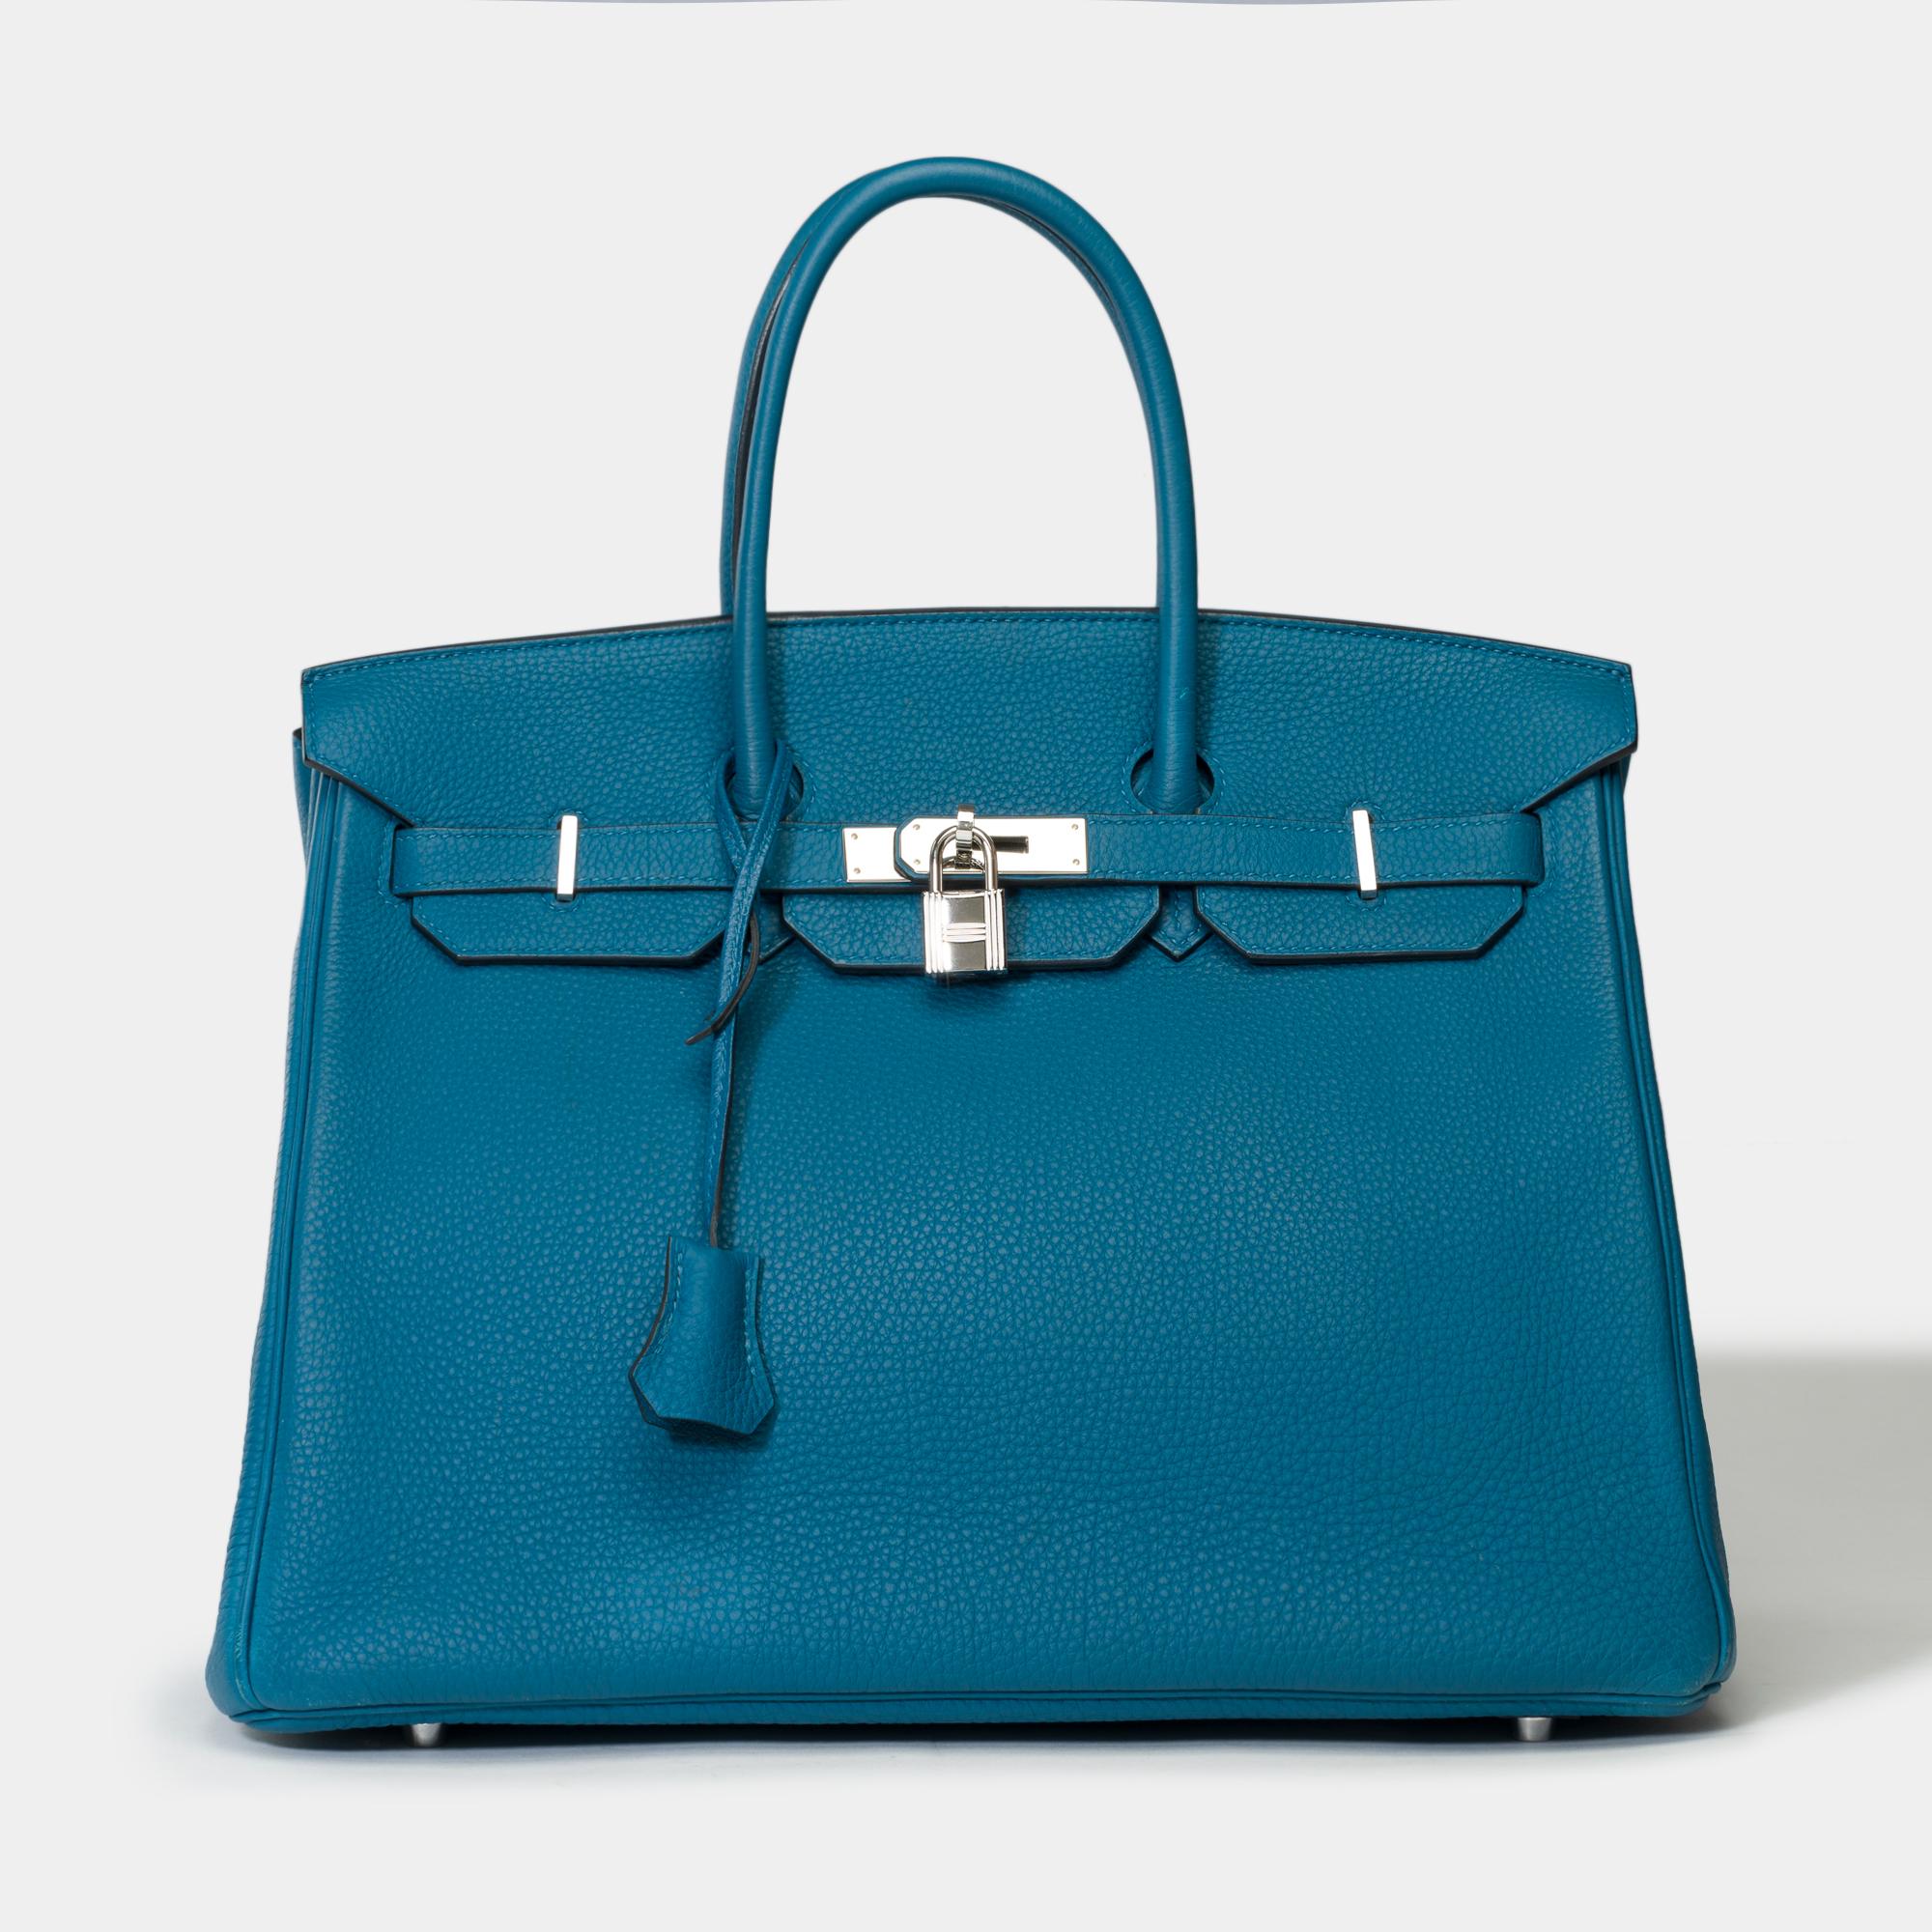 Amazing​ ​Hermès​ ​Birkin​ ​35​ ​in​ ​Blue​ ​Colvert​ ​Togo​ ​leather​ ​​ ​,​ ​palladium​ ​silver​ ​metal​ ​trim​ ​,​ ​double​ ​handle​ ​in​ ​blue​ ​leather​ ​for​ ​hand​ ​carry

Flap​ ​closure
Blue​ ​leather​ ​inner​ ​lining​ ​with​ ​beige​